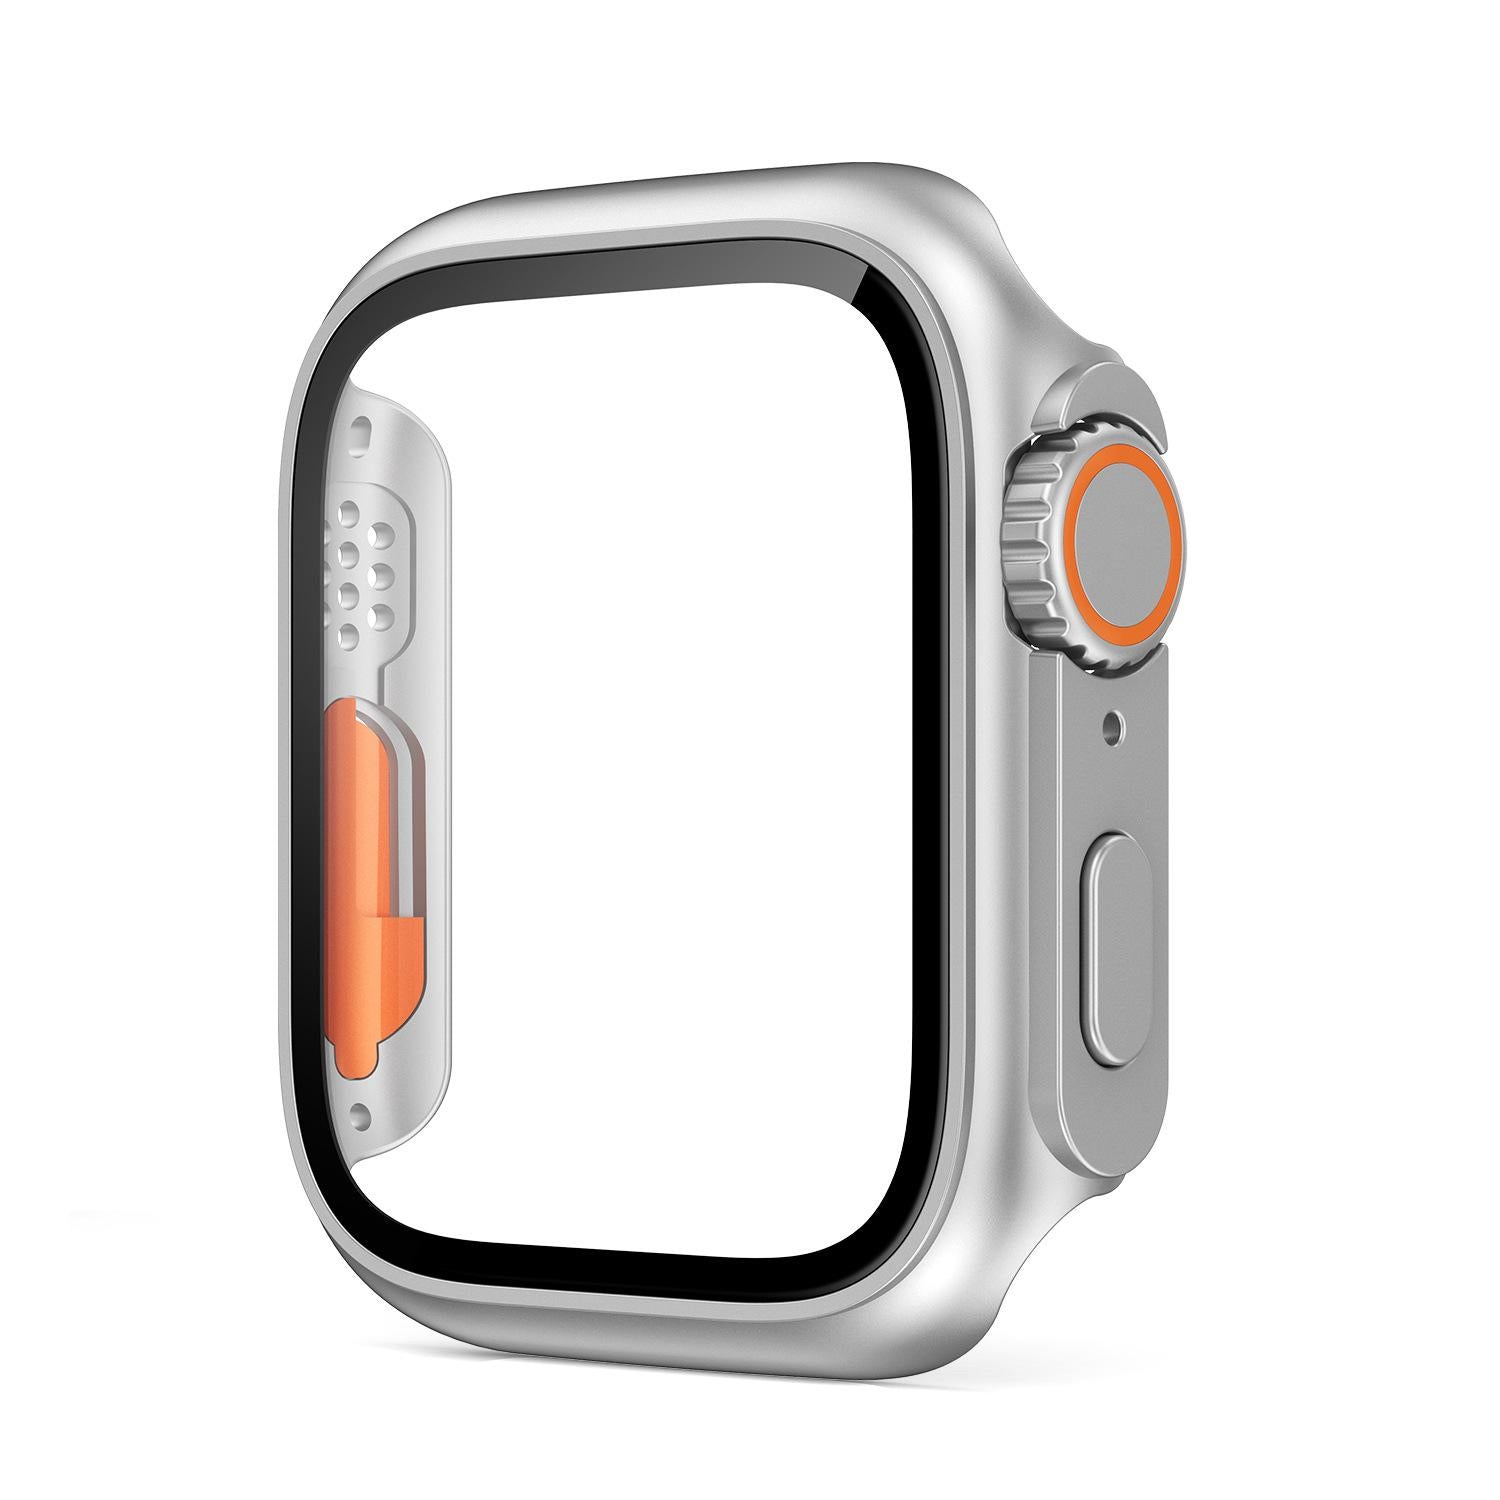 Ahnhsky Protective Case with Screen Protector For Apple Watch Three store